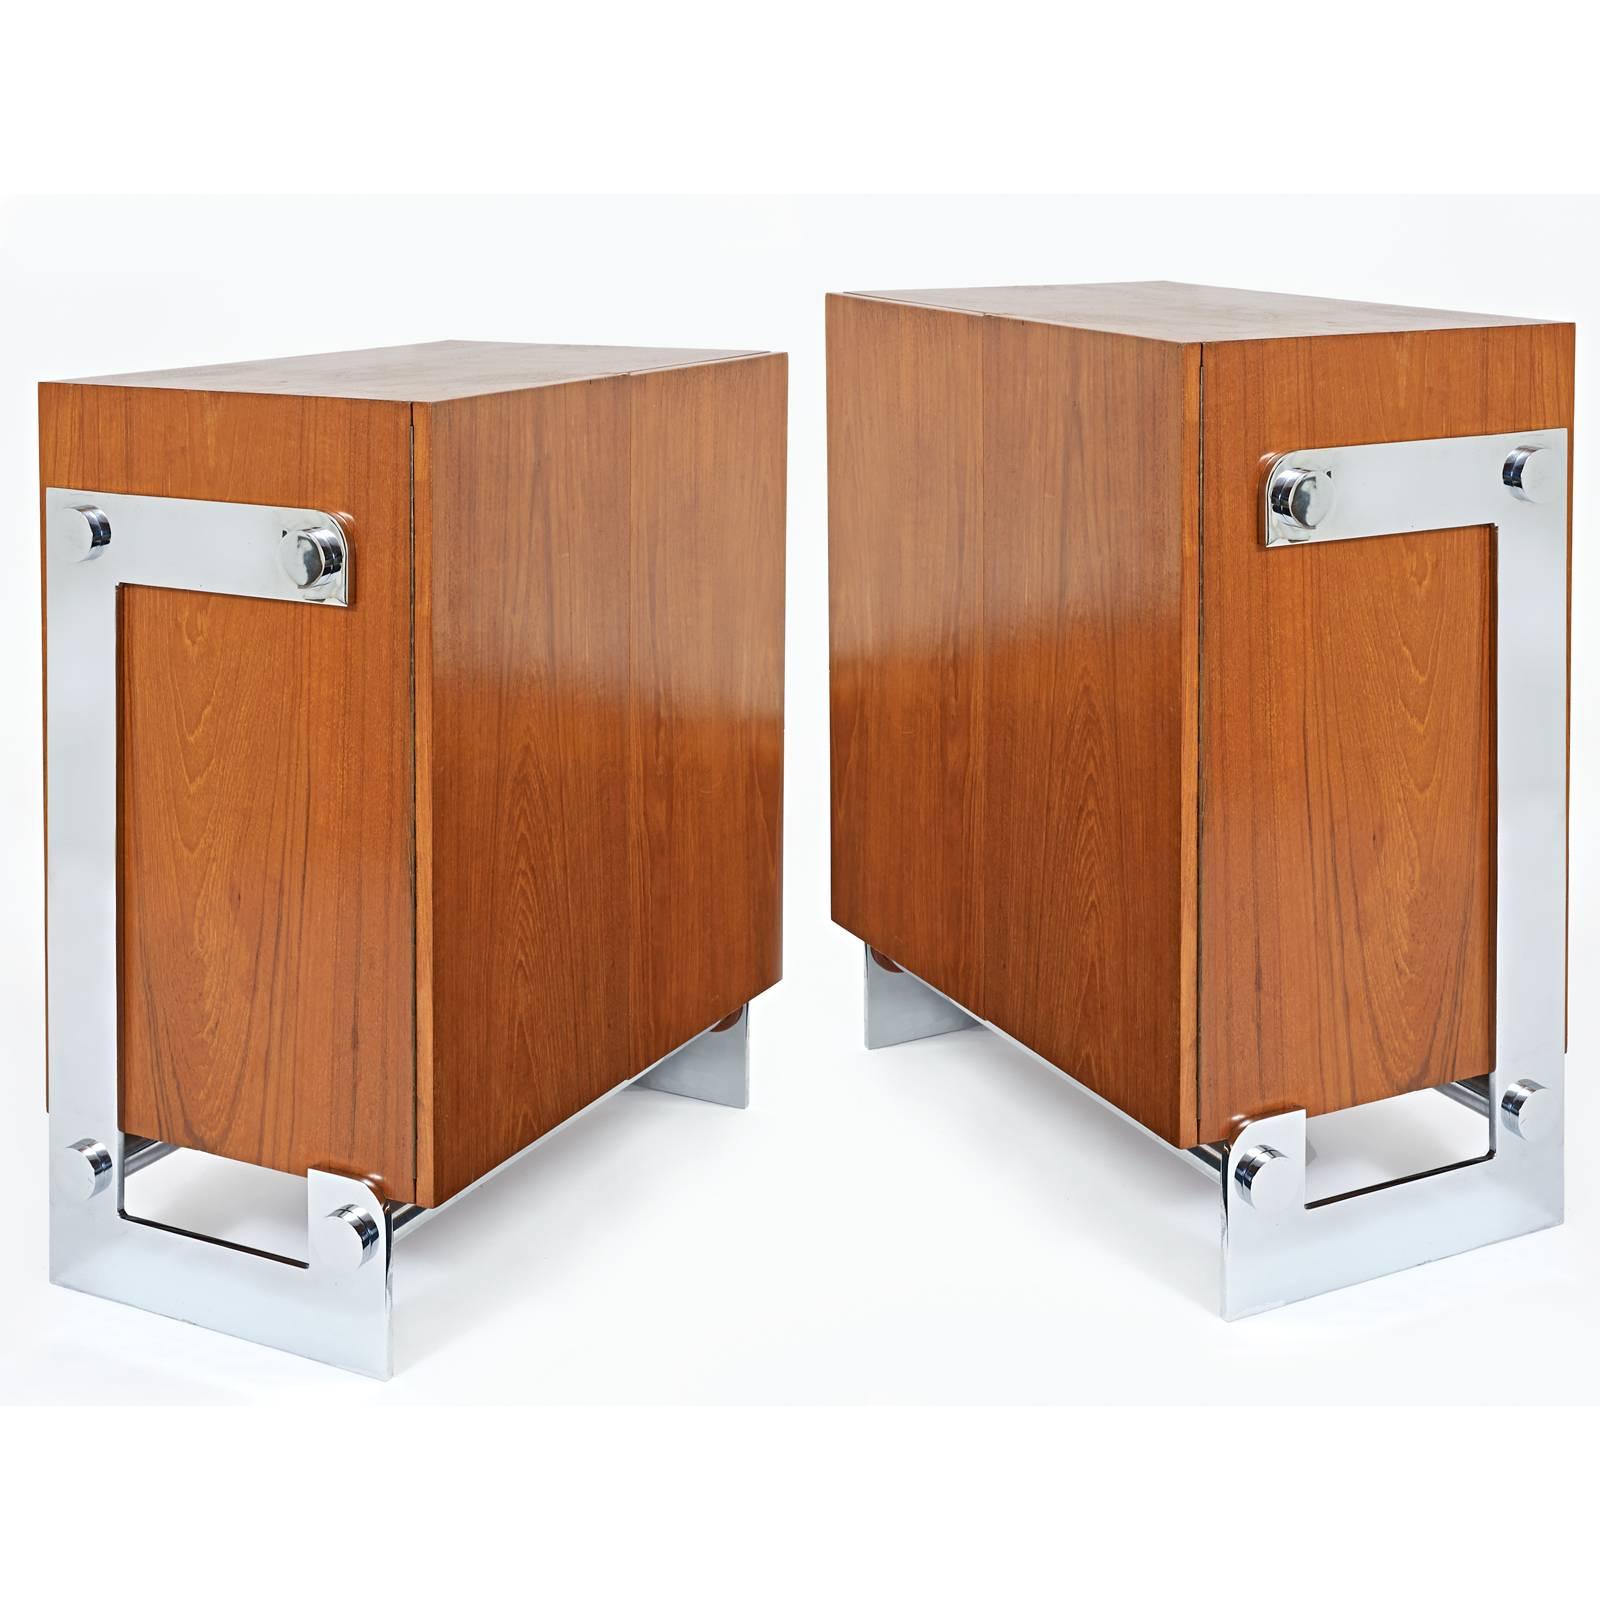 GILLES BOUCHEZ
A single handsome walnut cabinet with sculptural chromed steel mounts.
Finished interior with two shelves.  Finished back, can be used floating.
France, 1970s
ONE AVAILABLE
Dimensions: 29 W x 16.5 D x 33 H.